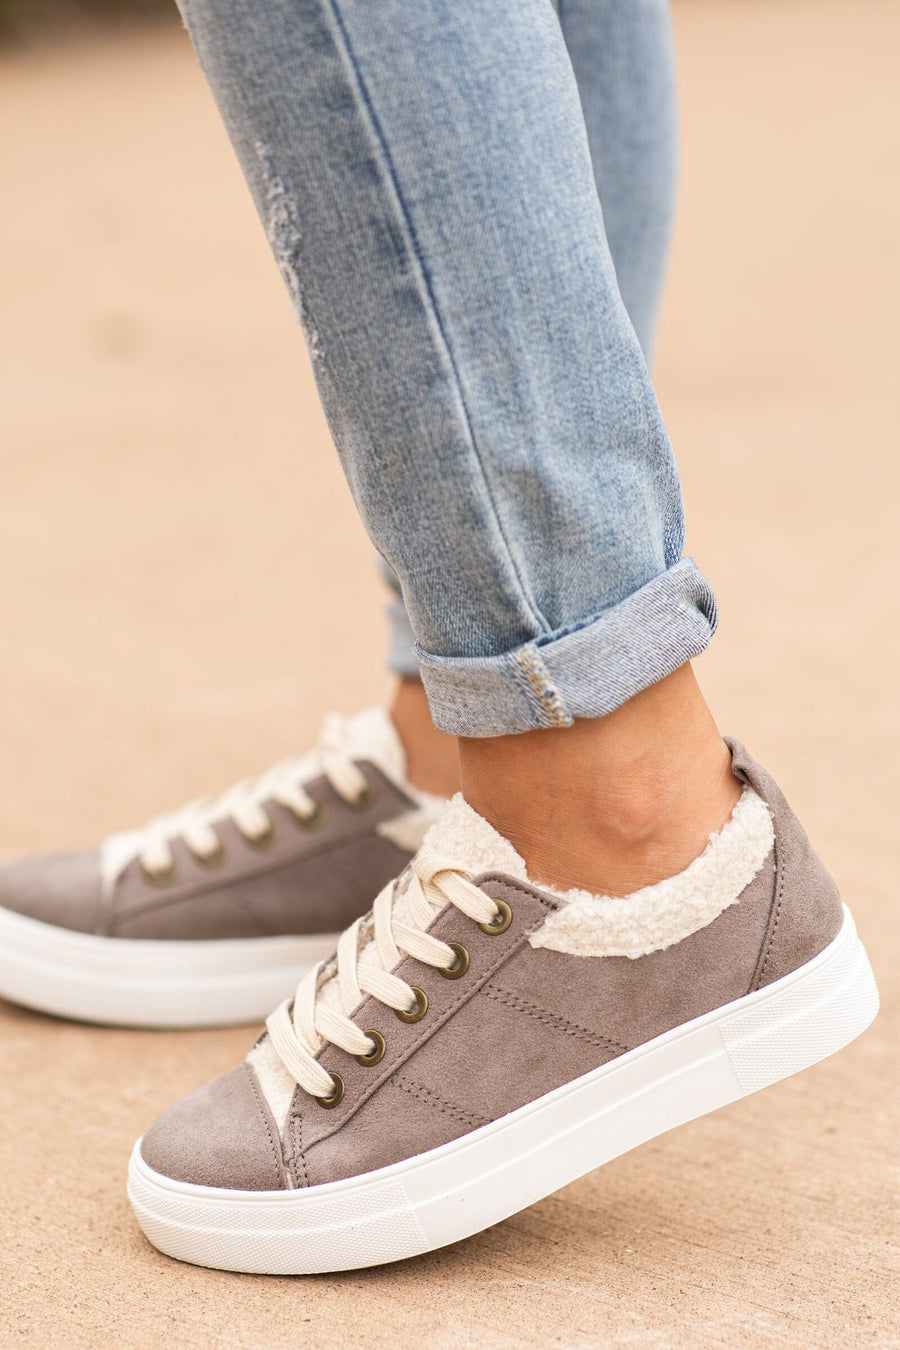 Grey and Beige Lace Up Sneakers - Filly Flair